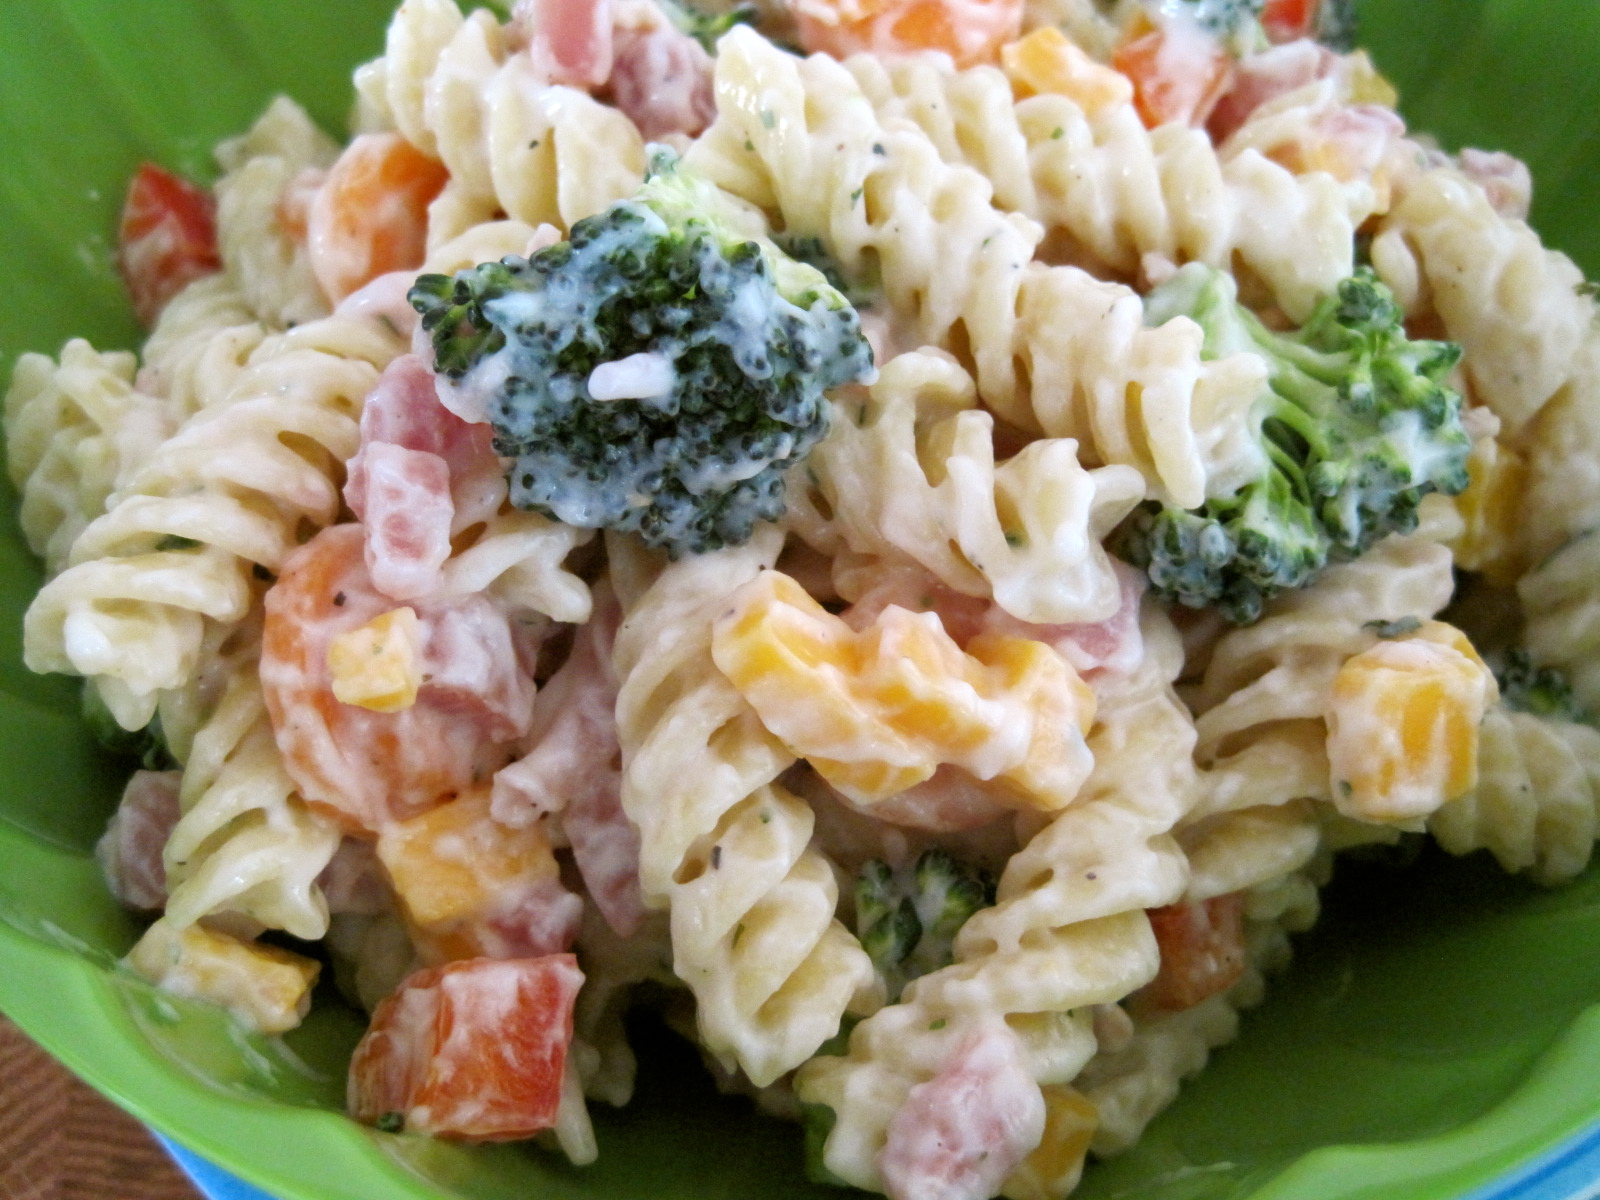 Home Cooking For Six   One   Ranch Pasta Salad